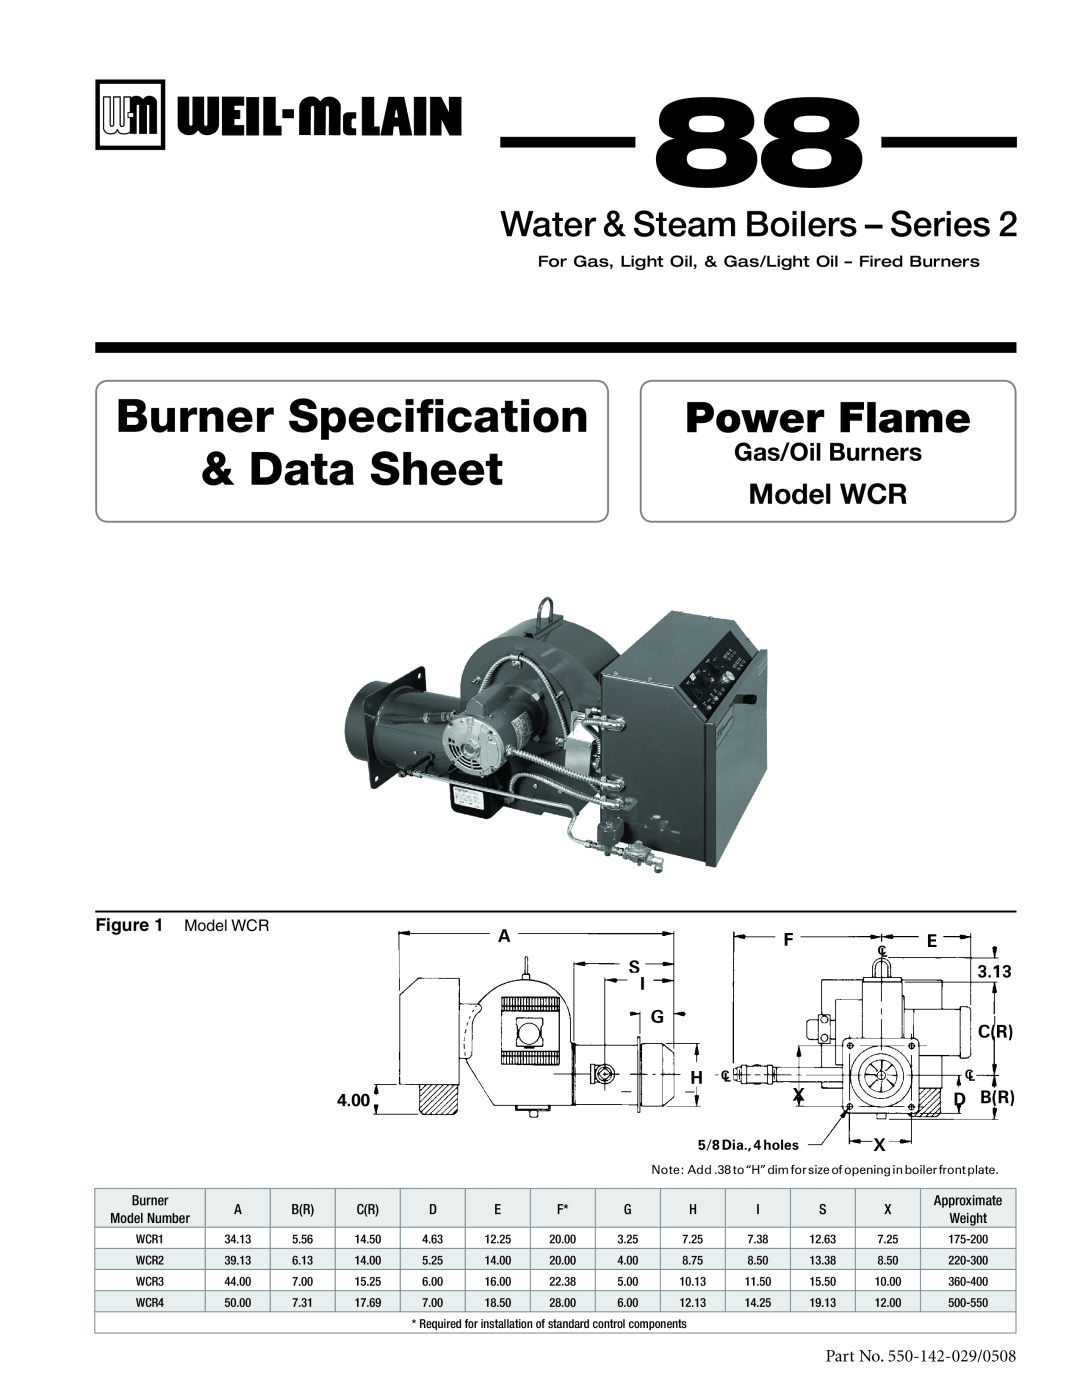 Weil-McLain manual Model WCR, Burner Specification & Data Sheet, Power Flame, Water & Steam Boilers - Series, 4.00 